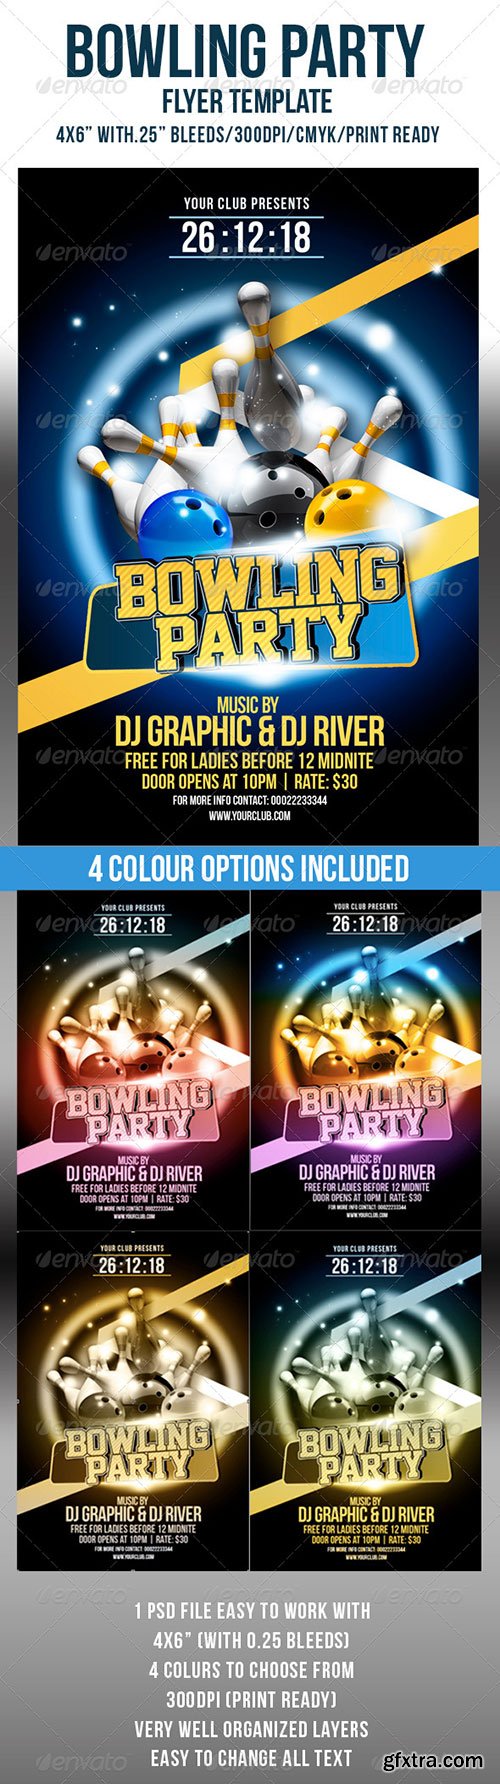 GraphicRiver - Bowling Party Flyer Template 4583827